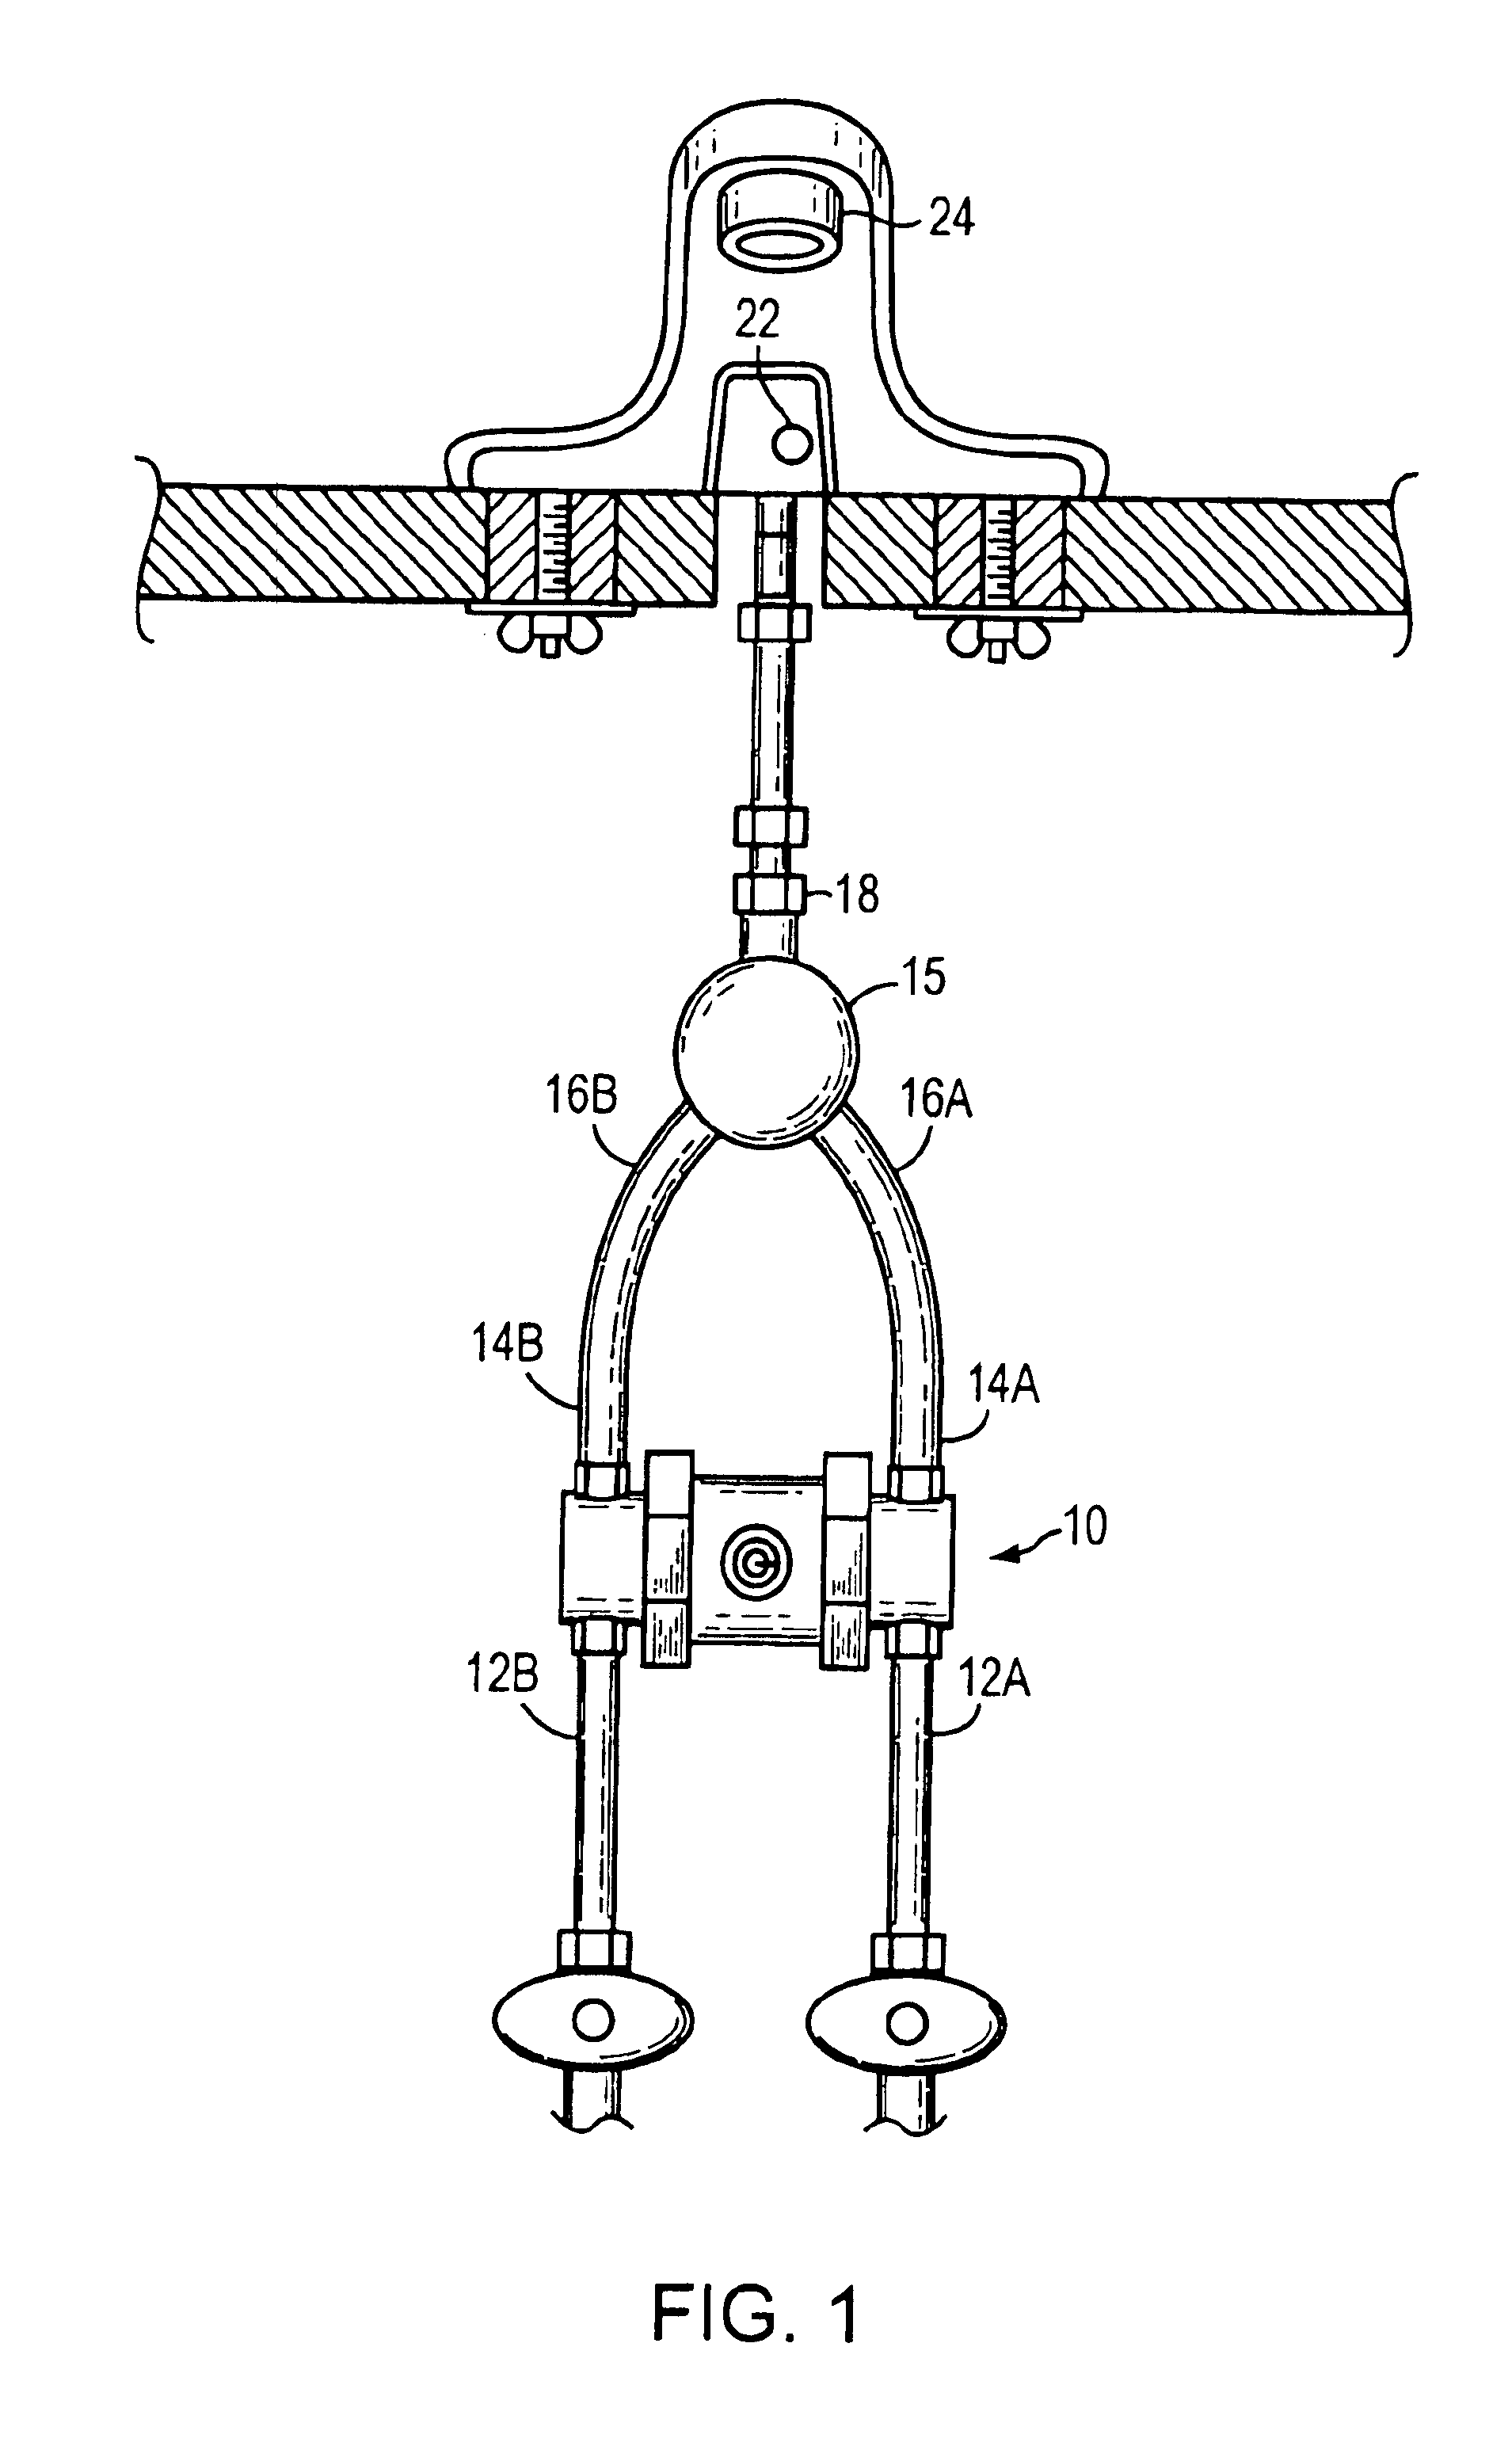 Device and method for operating at least two valves